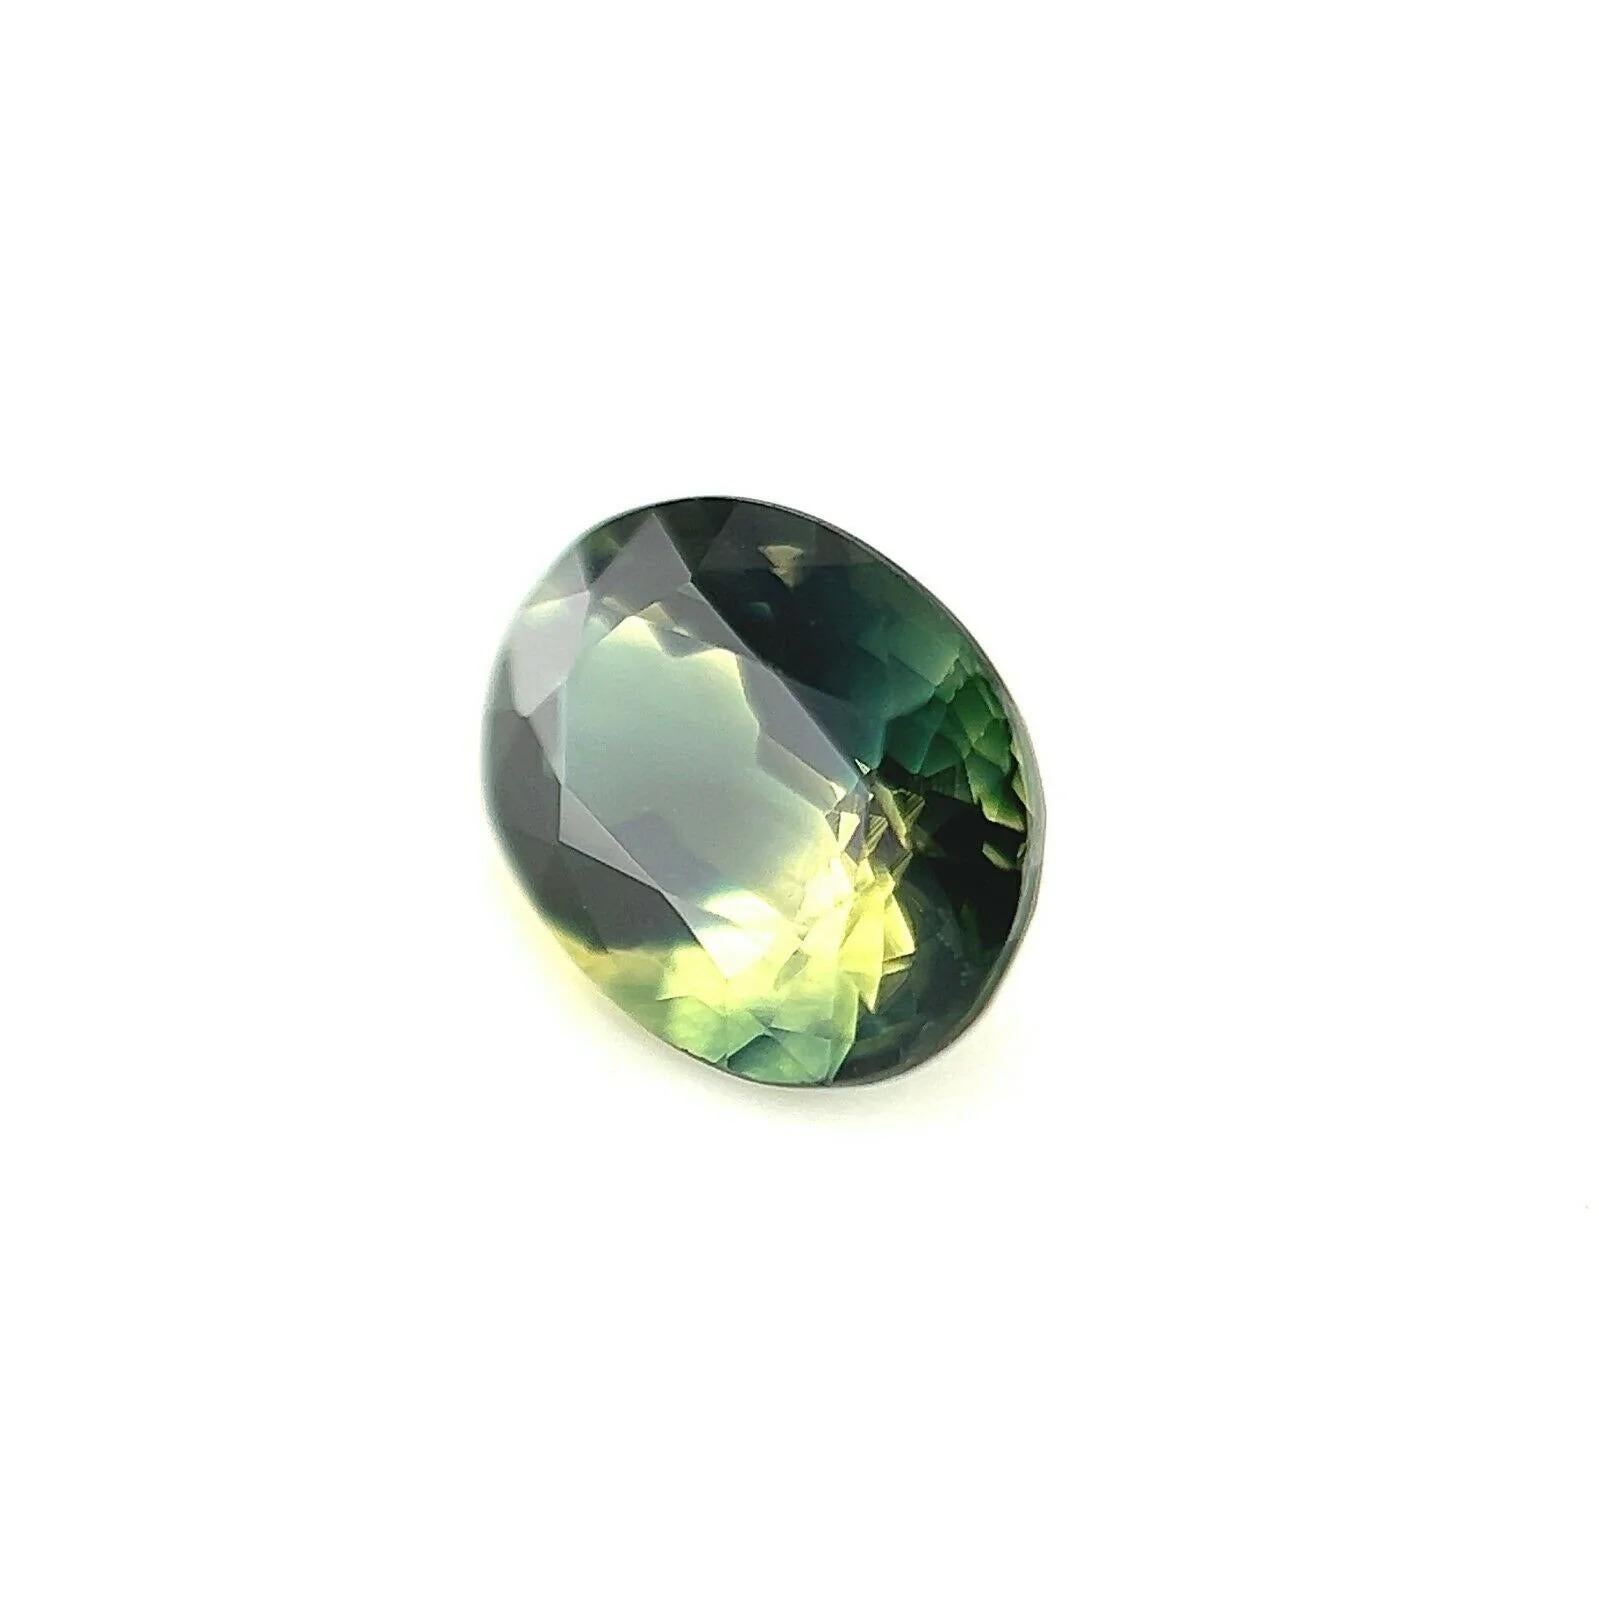 Australia Parti Colour Sapphire 0.94ct Blue Yellow Green Oval 6.7x5mm

Natural Greenish Yellow Blue Parti-Colour/Bi colour Australian Sapphire Gemstone.
0.94 Carat with a beautiful blue green colour and excellent clarity. Also has an excellent oval